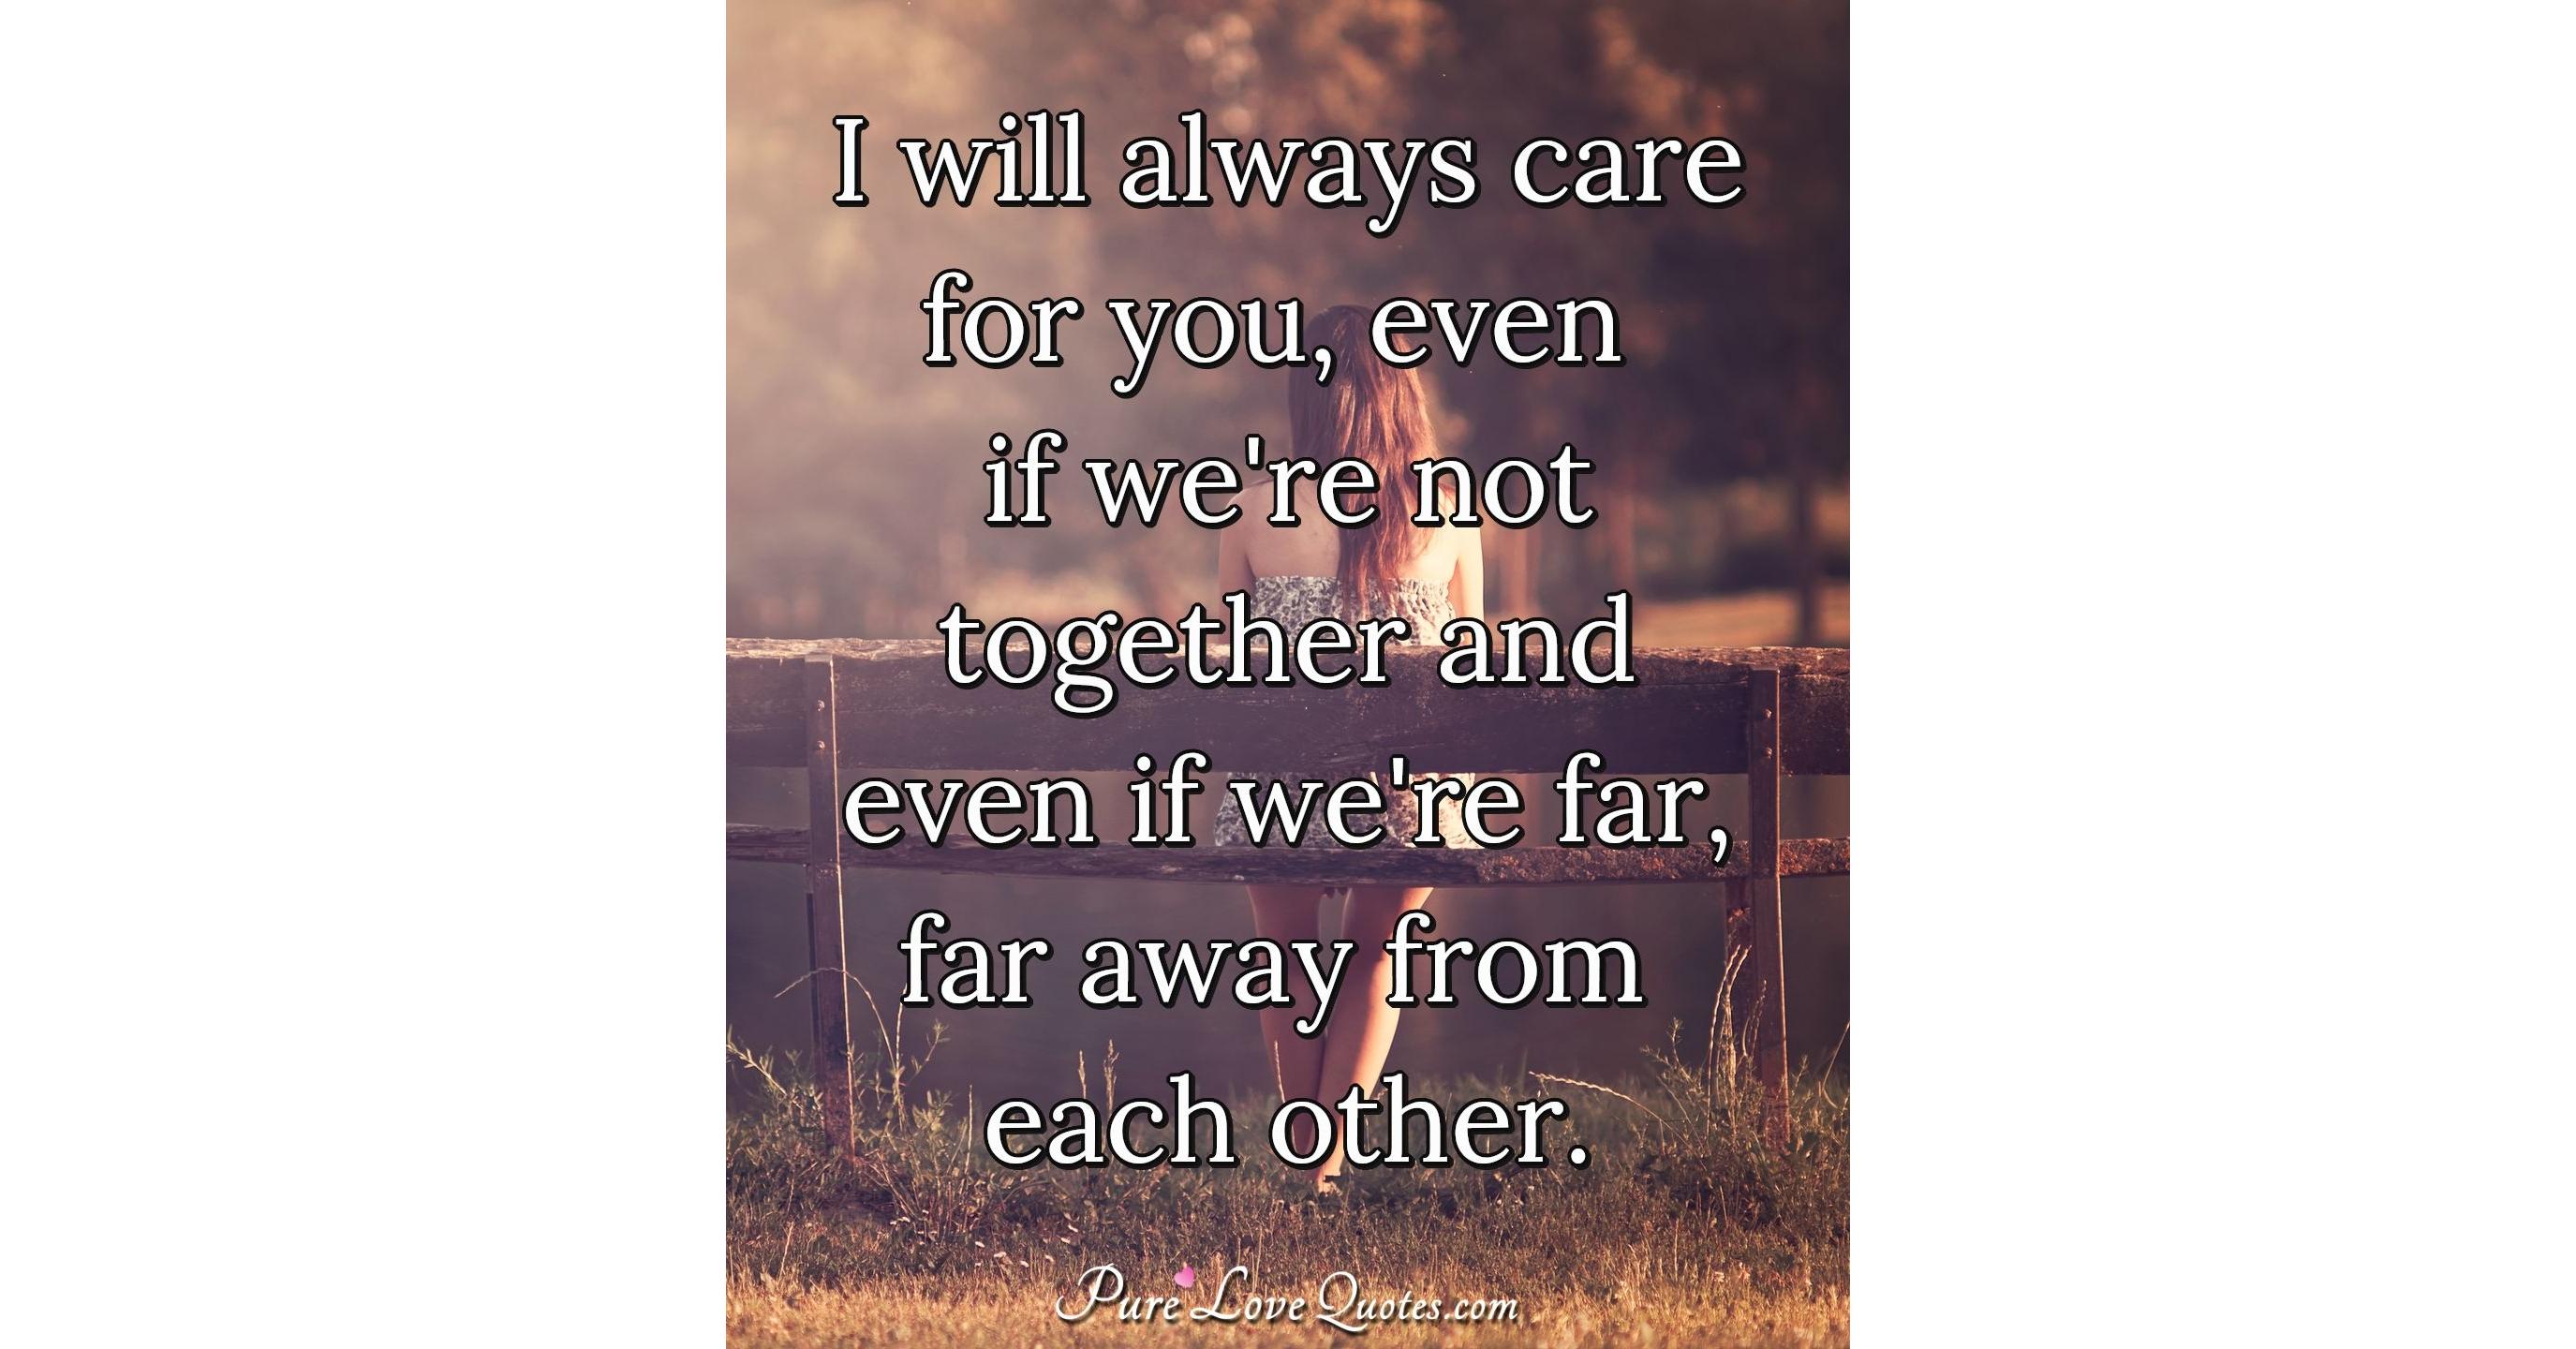 I will always care for you, even if we're not together and even if we